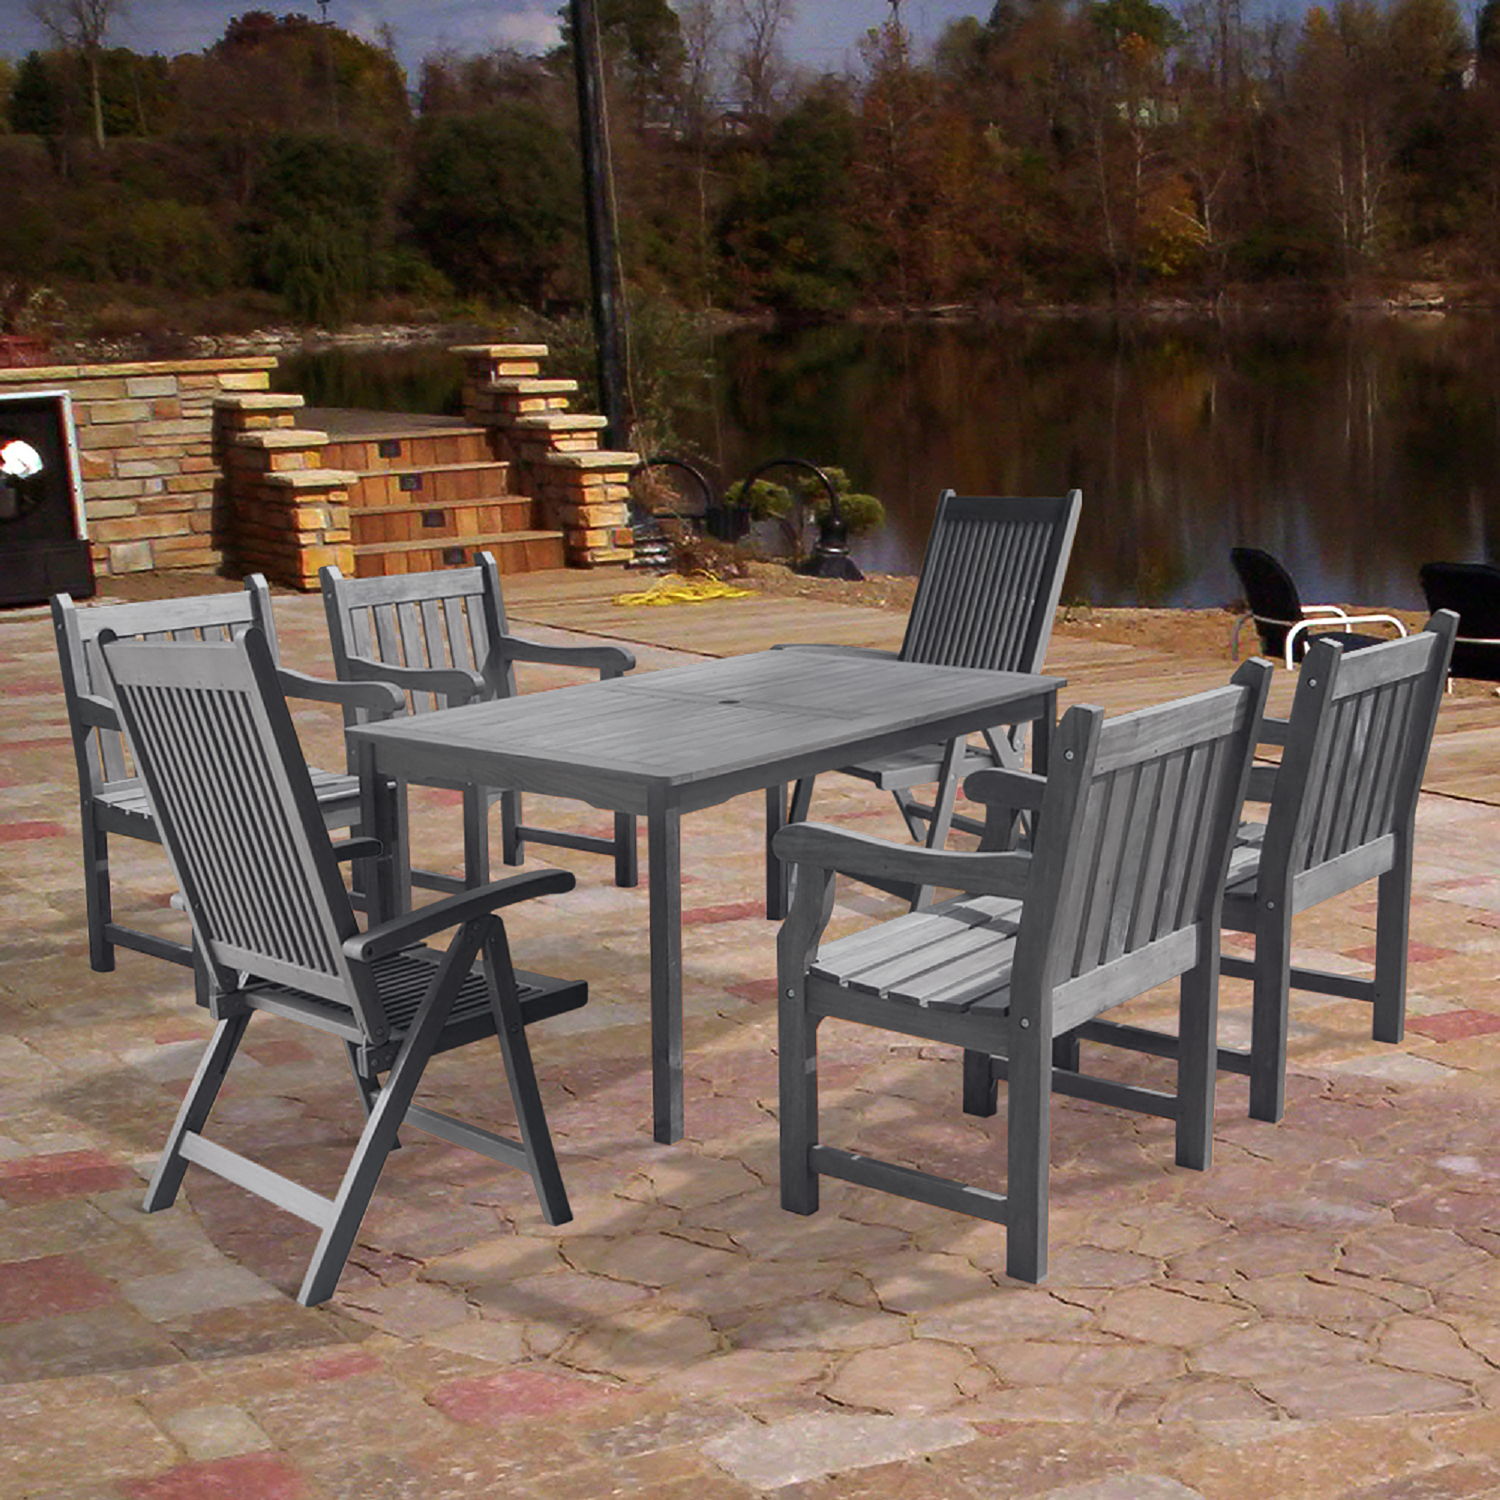 Renaissance Outdoor Patio Hand-scraped Wood 7-piece Dining Set with Reclining Chairs